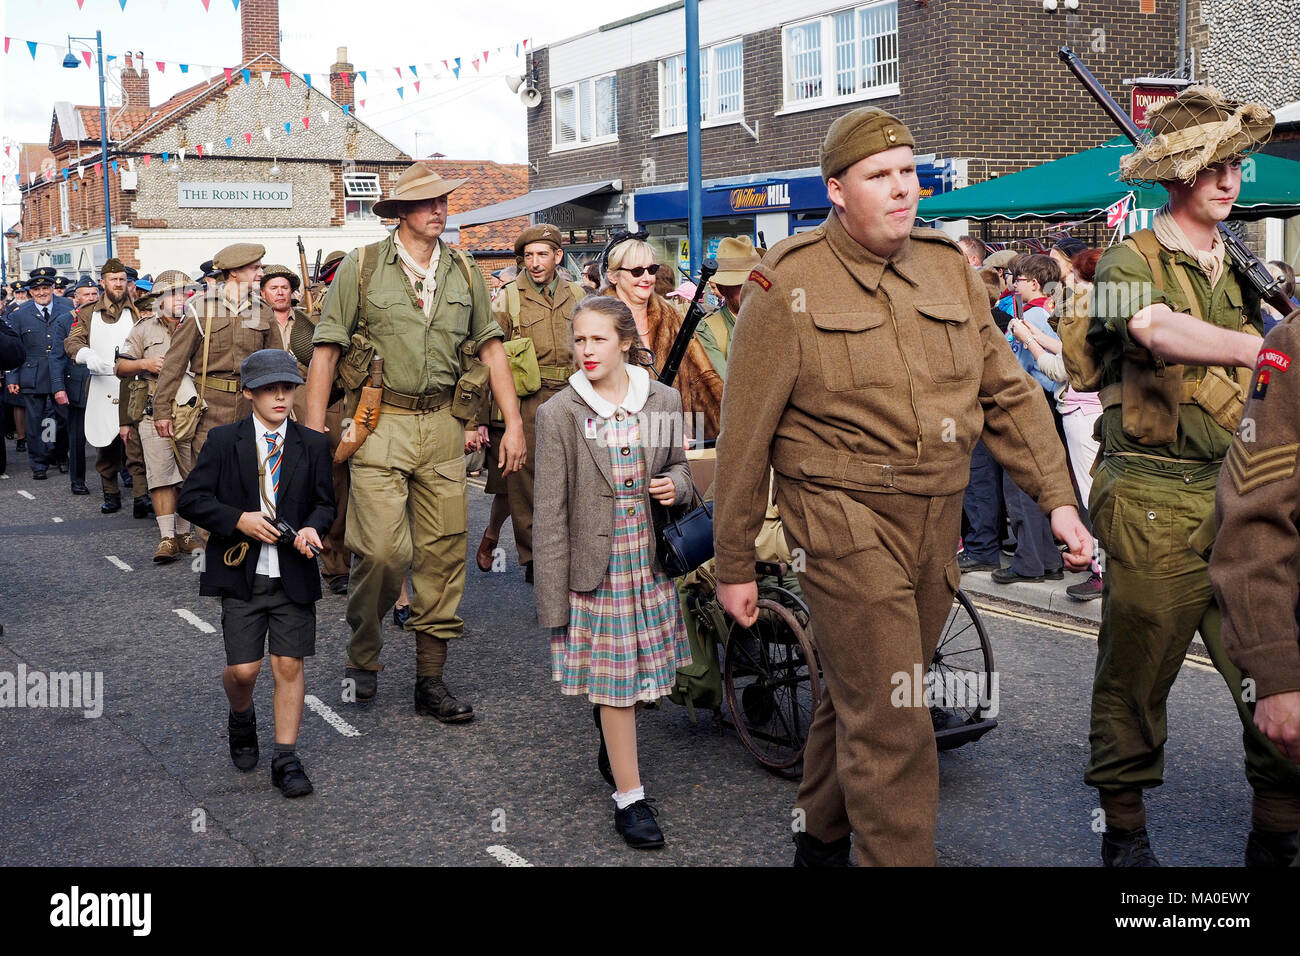 A carnival atmosphere at the 1940's weekend in Sheringham, Sept 2017, part of an event organised by the North Norfolk Railway. Victory parade. Stock Photo